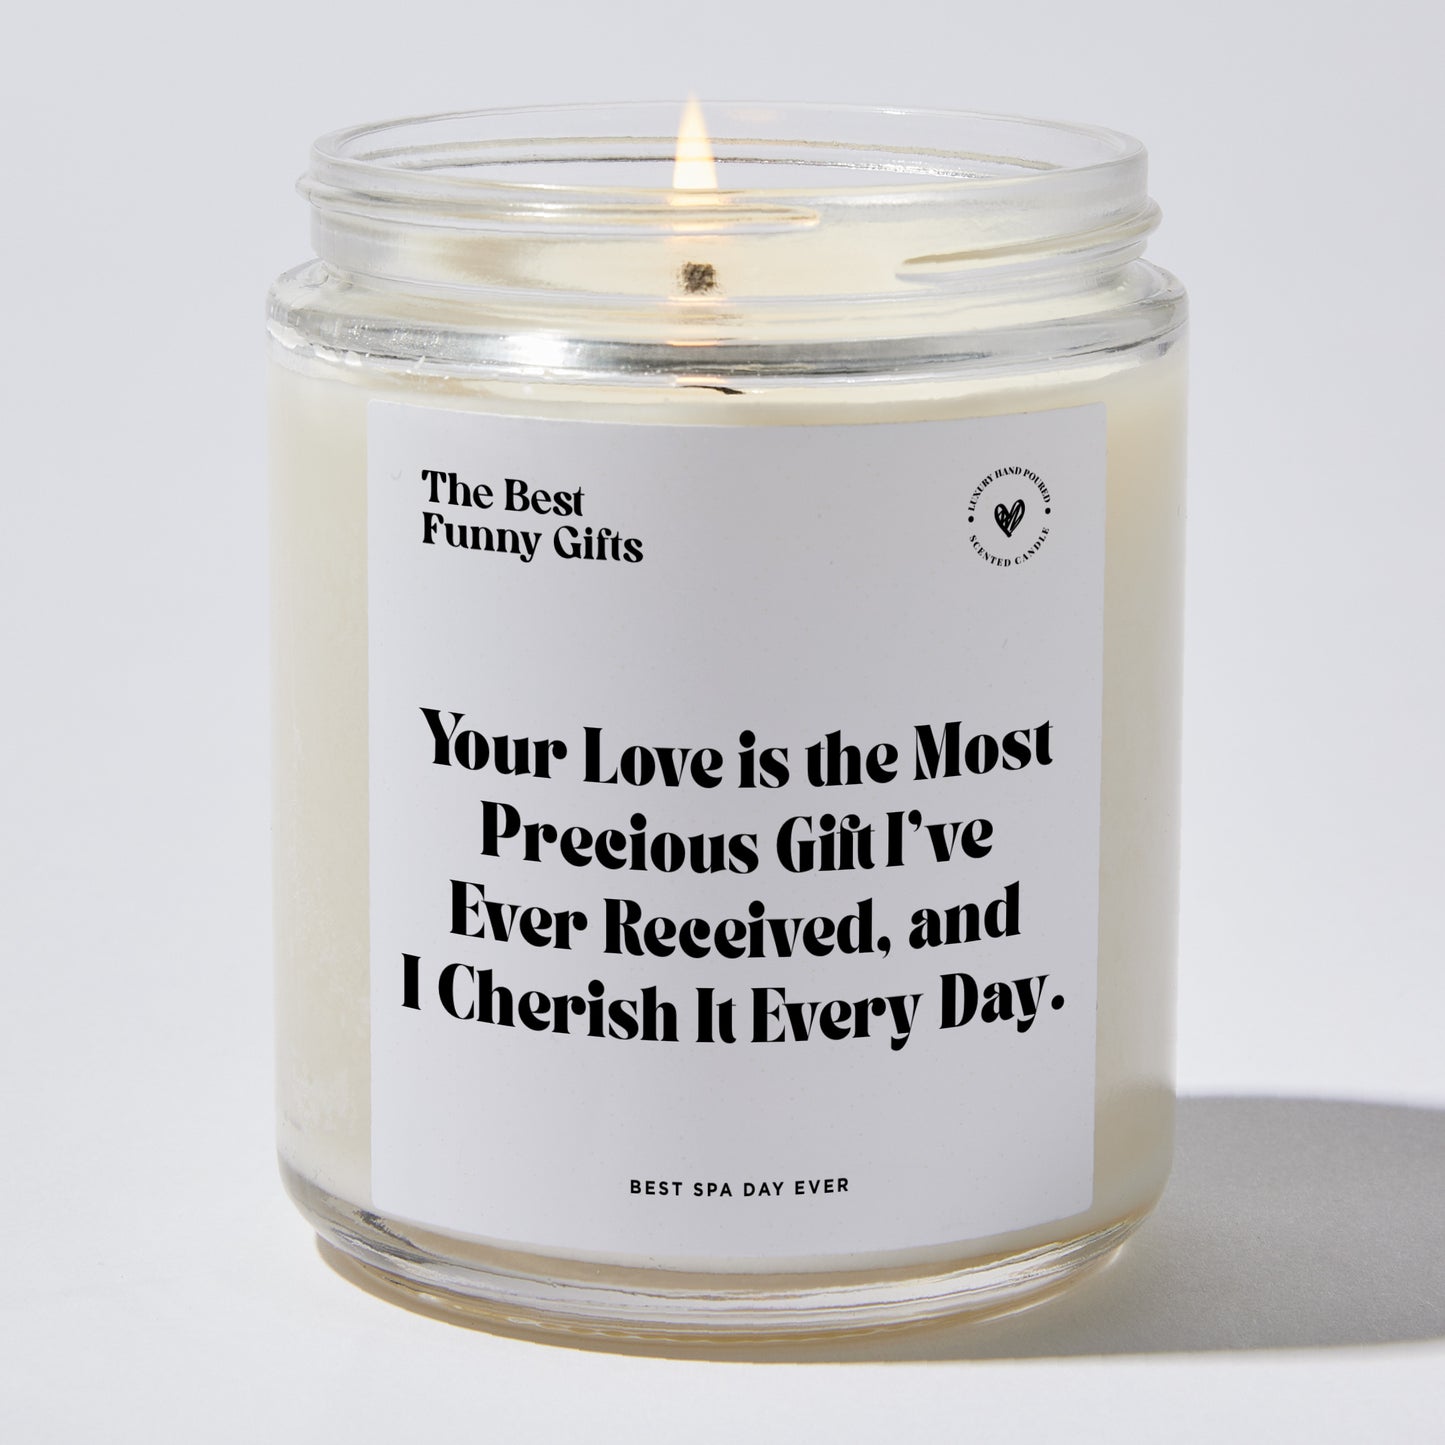 Anniversary Present - Your Love is the Most Precious Gift I've Ever Received, and I Cherish It Every Day. - Candle